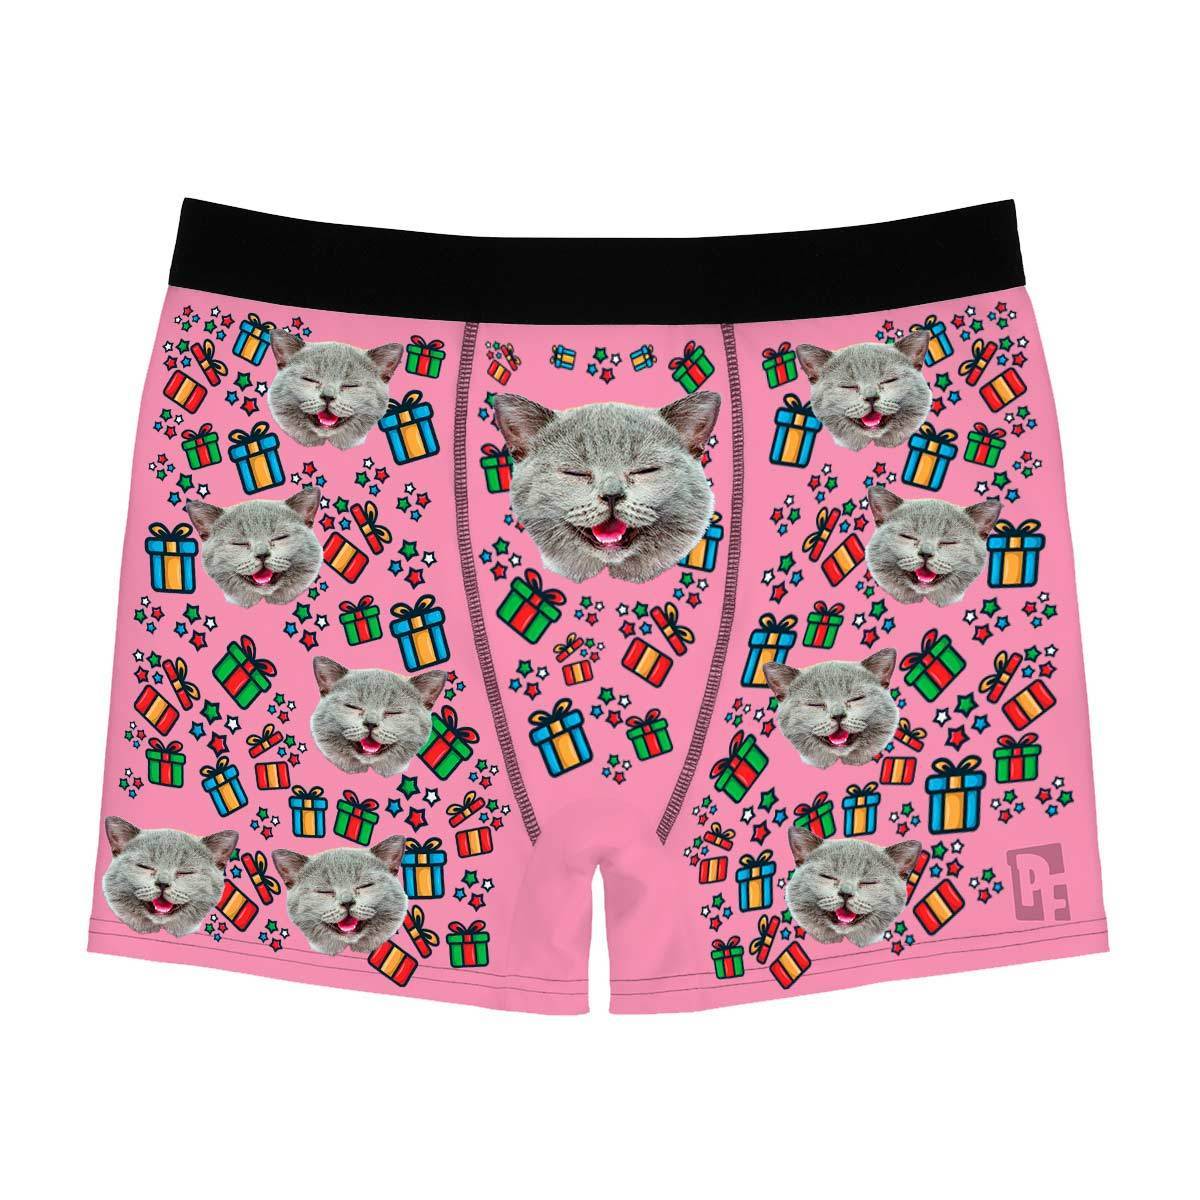 Pink Gift Box men's boxer briefs personalized with photo printed on them